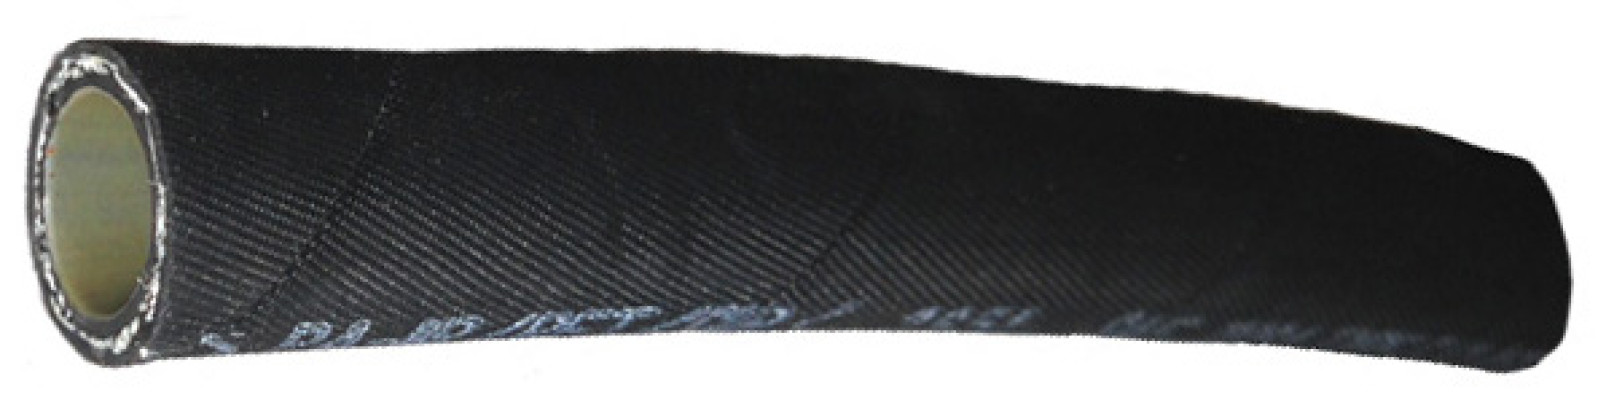 Image of A/C Refrigerant Hose from Sunair. Part number: GH134-10